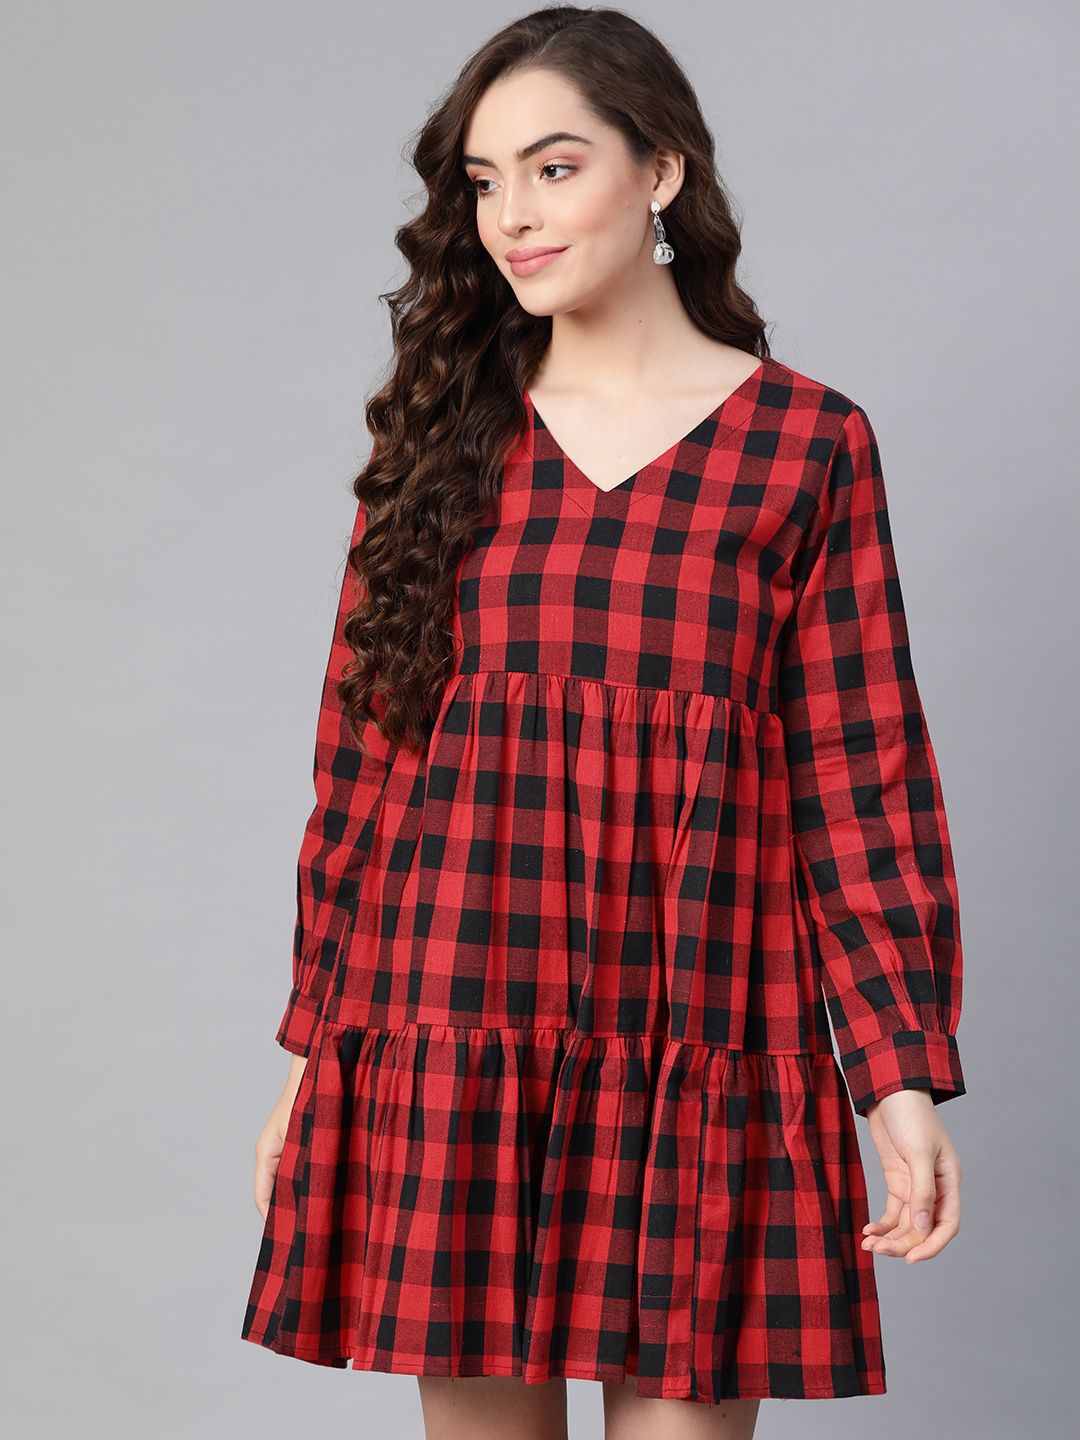 MBE Red & Black Checked A-Line Dress Price in India